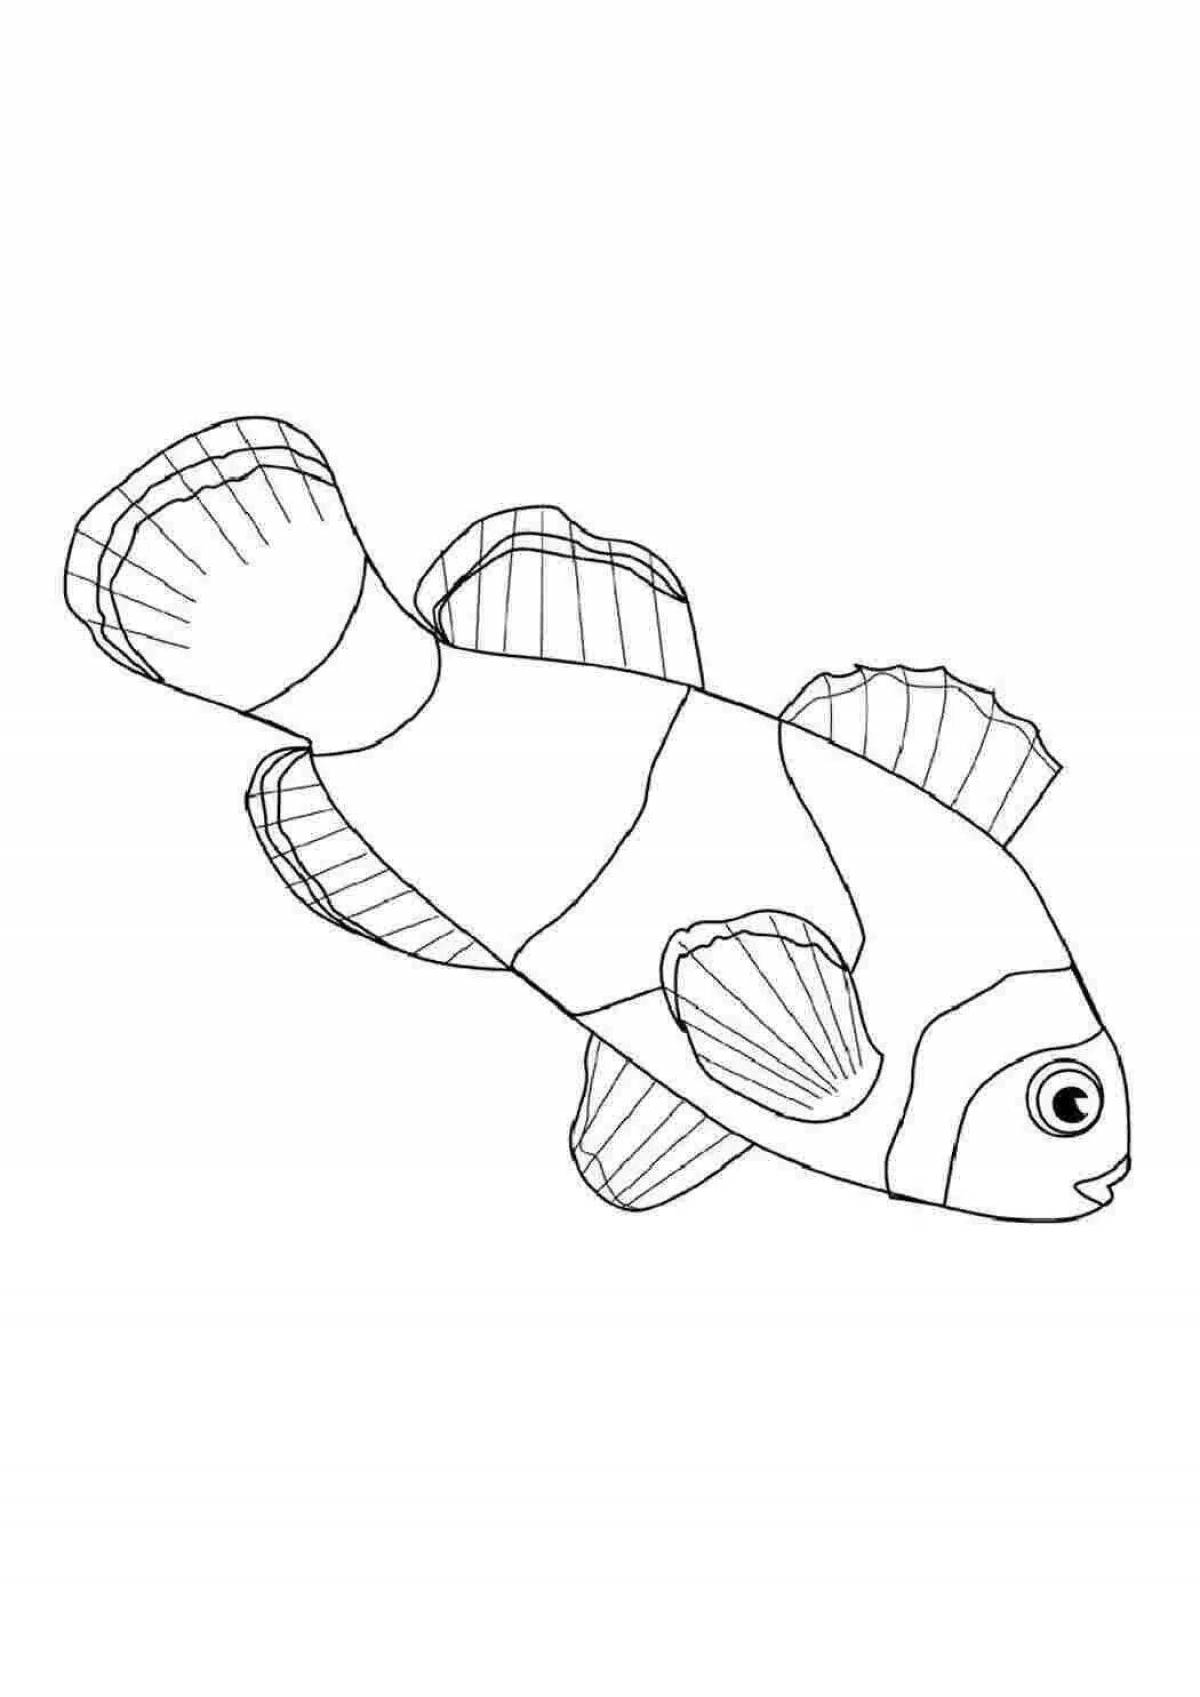 Adorable clownfish coloring page